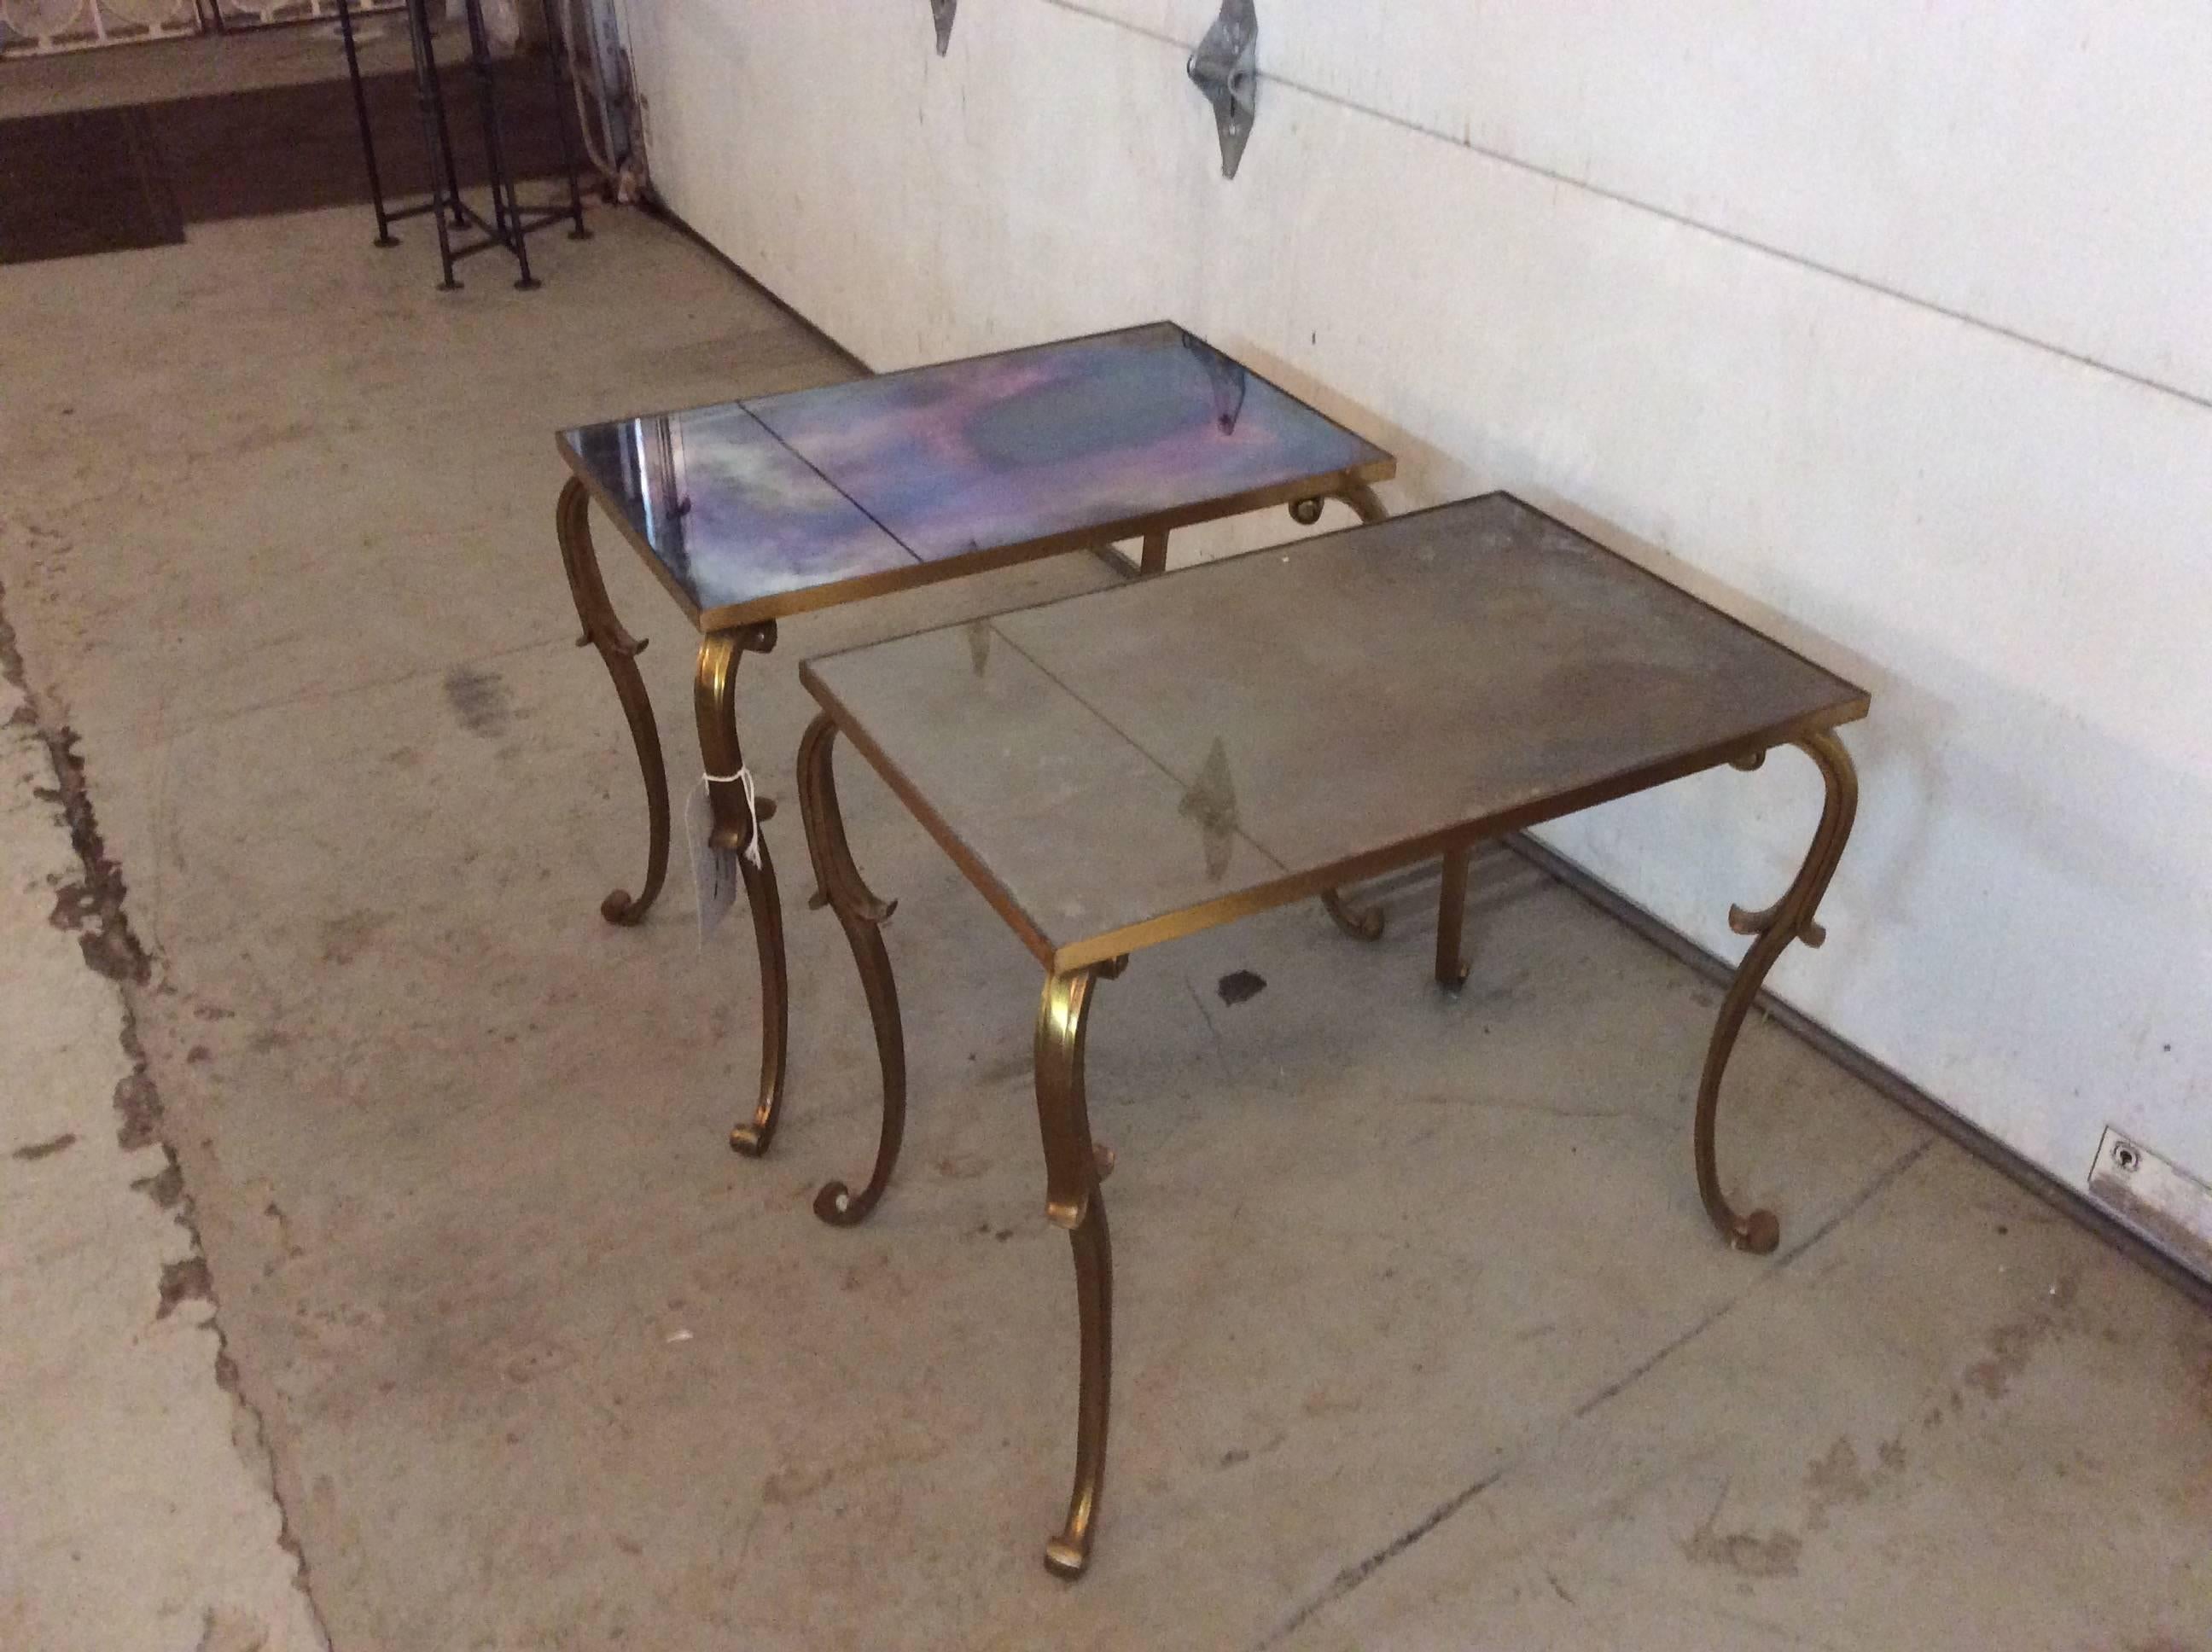 Exquisite pair of bronze side tables from France with original eglomise glass from the 1930s.